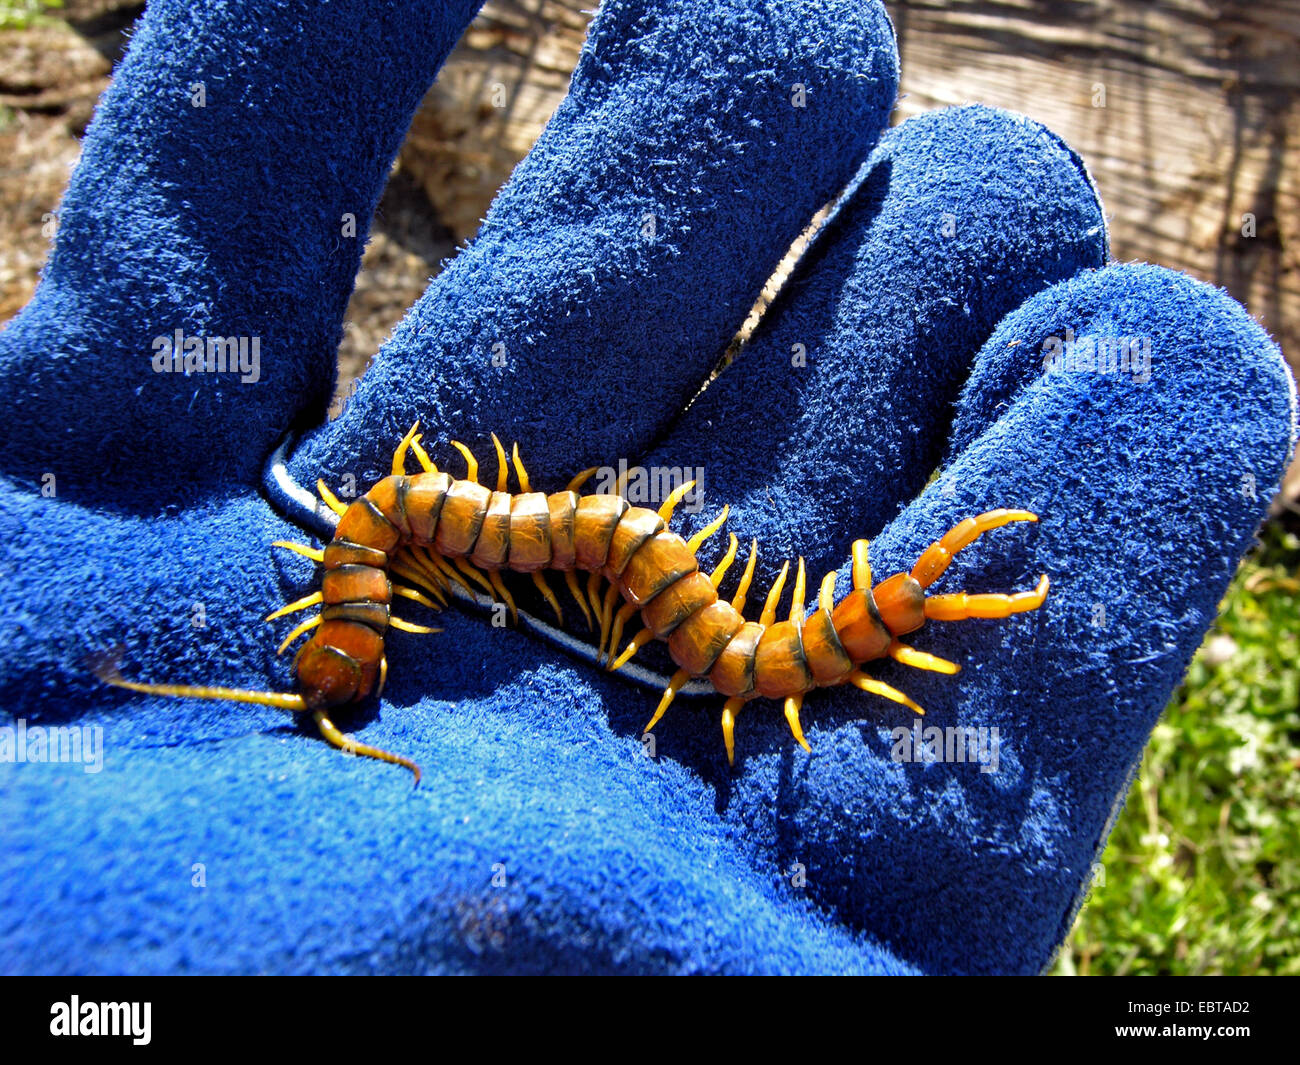 Southern girdled scolopendra (Scolopendra cingulata), in a hand in a protective glove, Spain, Extremadura Stock Photo